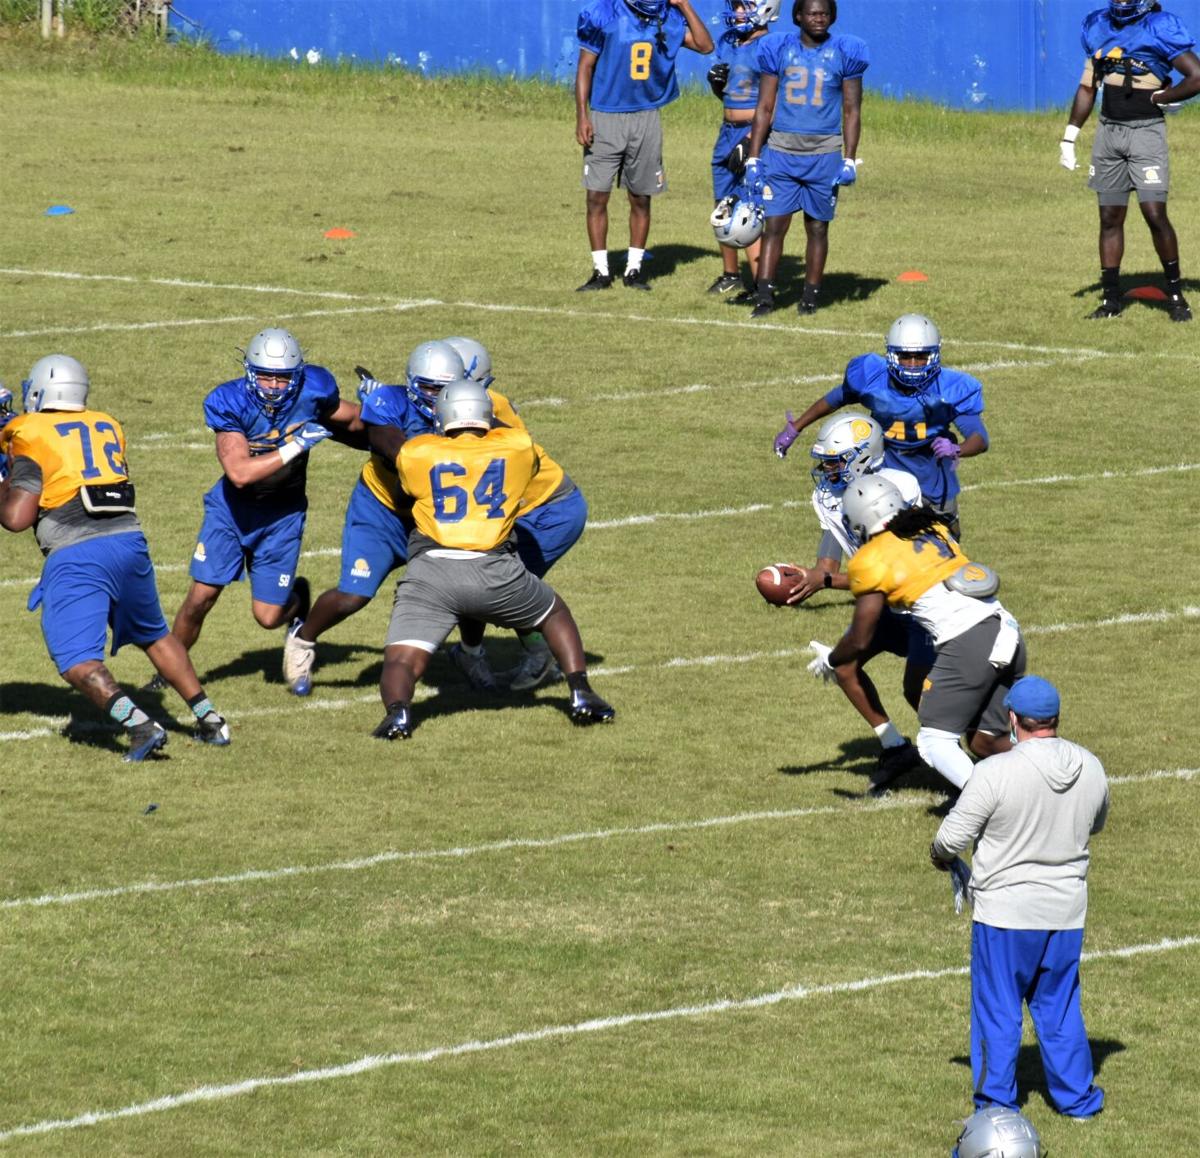 PHOTOS Albany State University football team spring practice